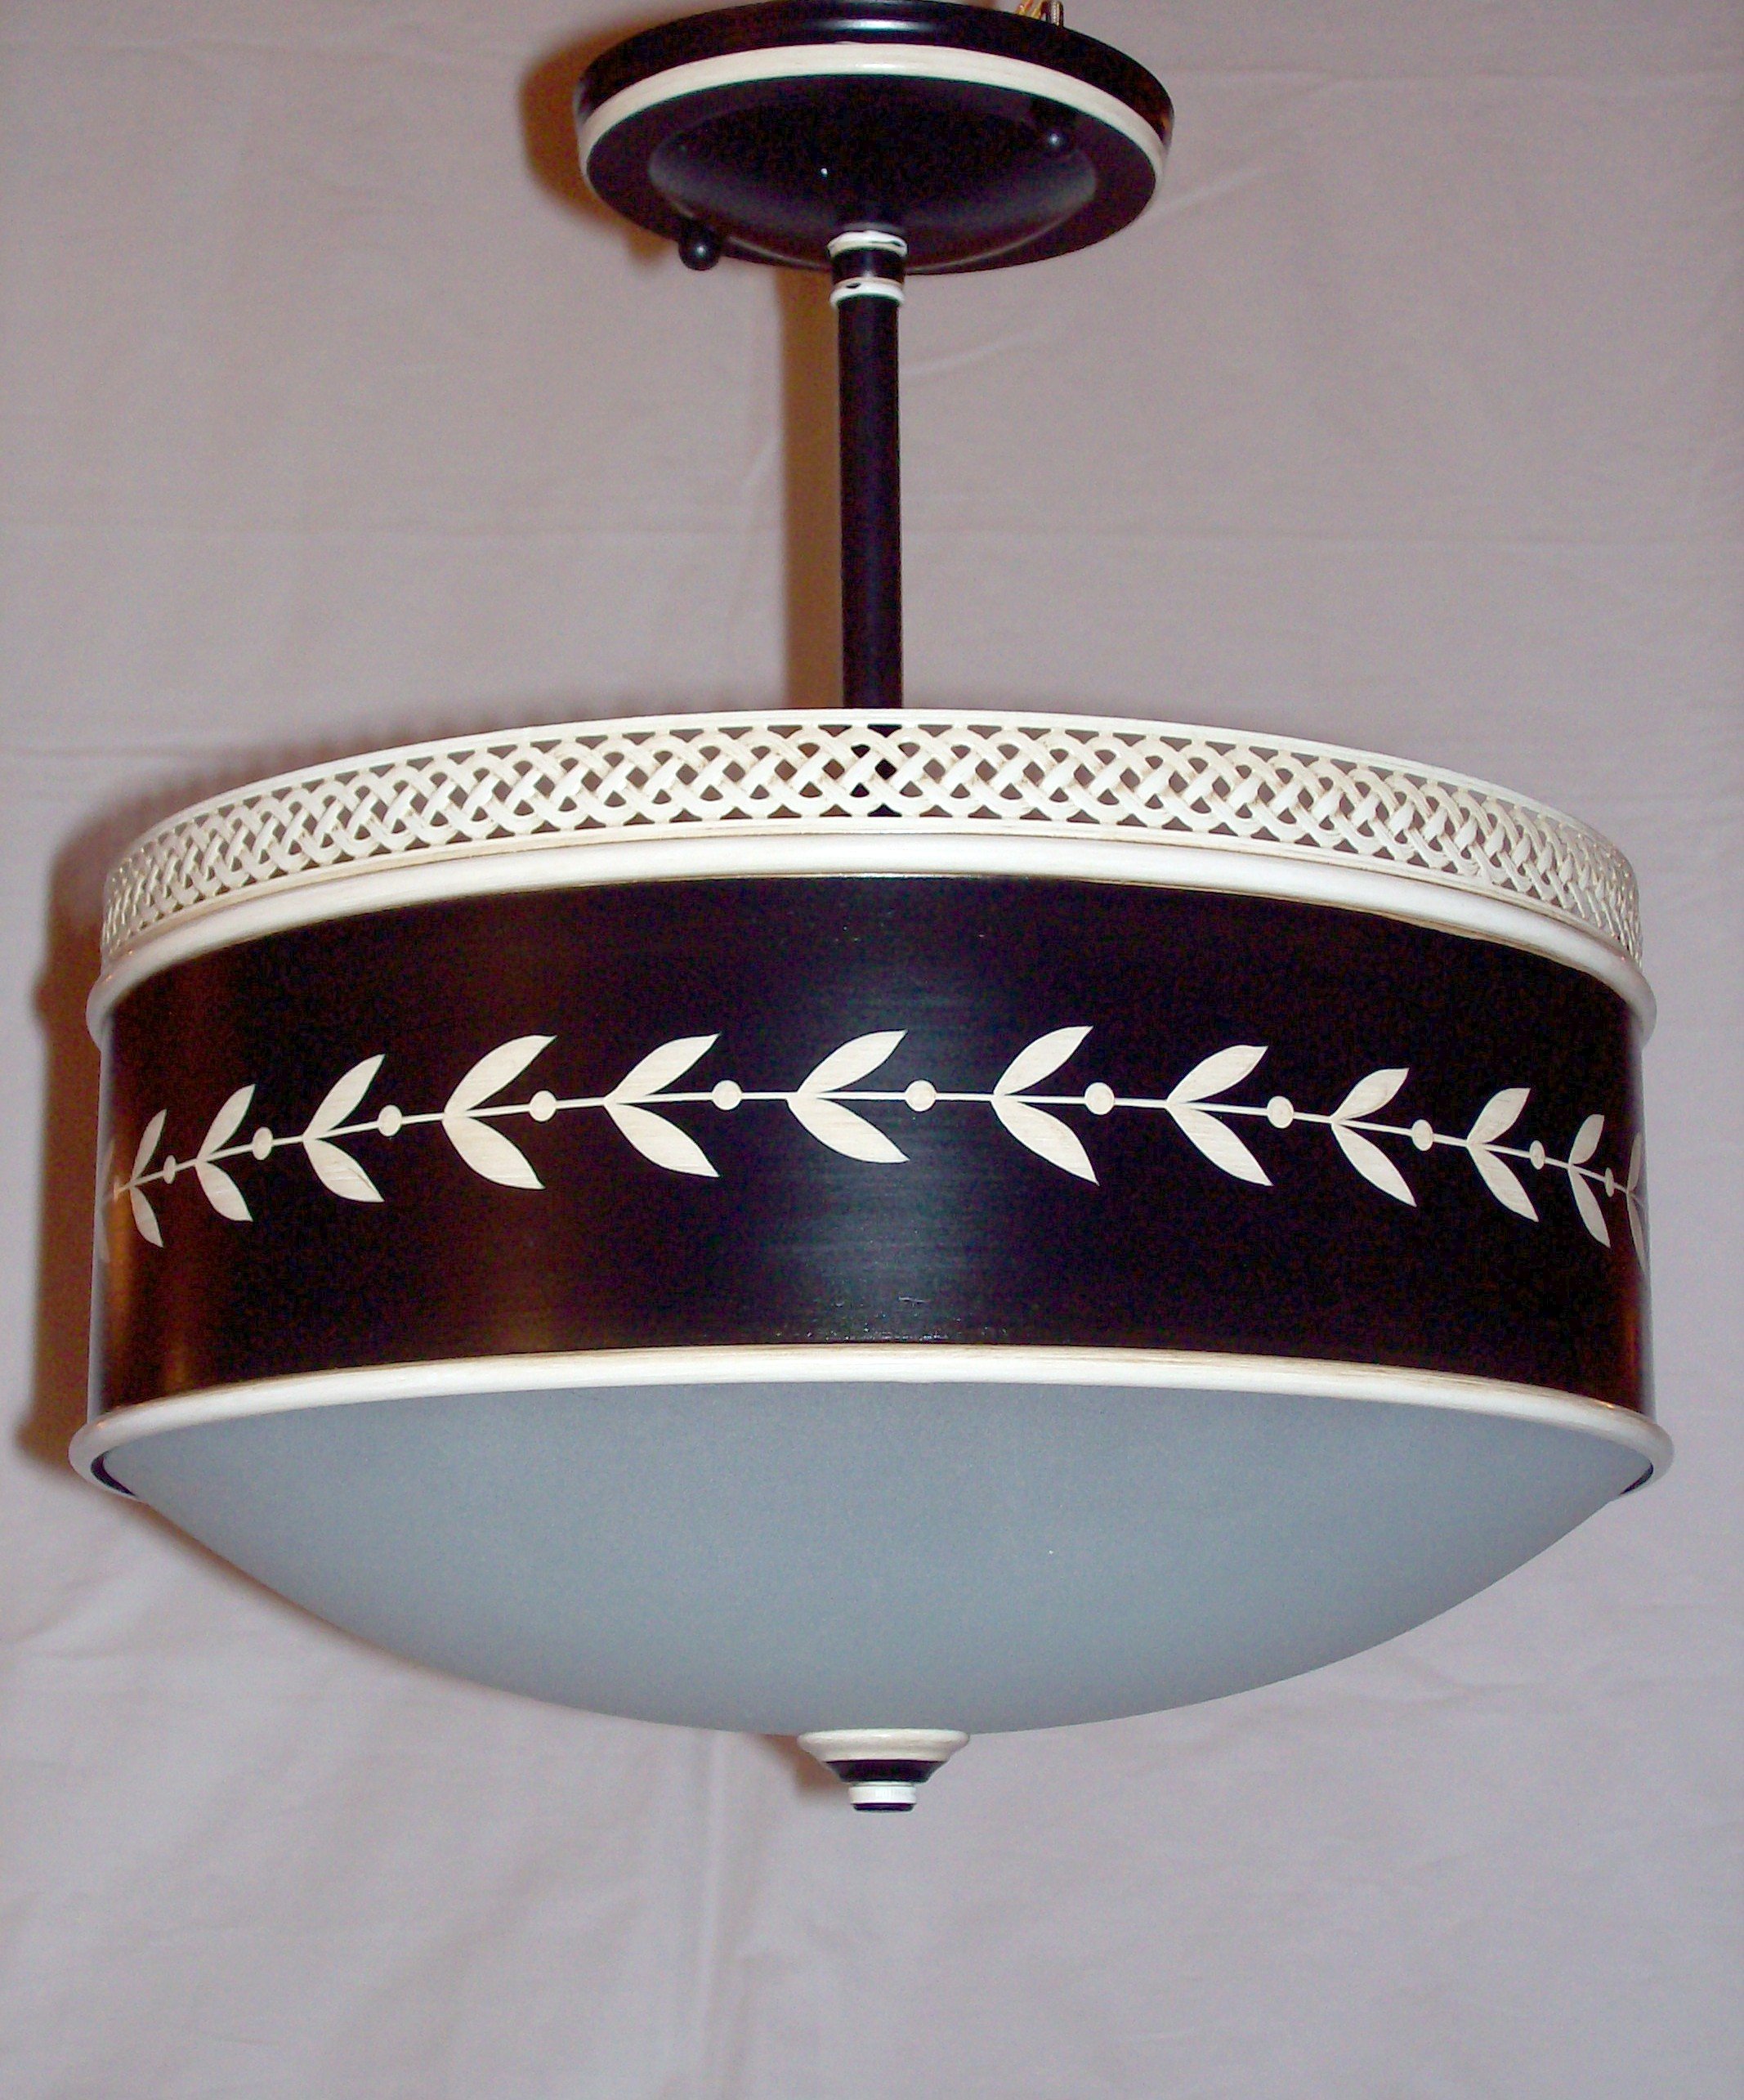 Round Tole Pendant
DP 3406 (12" D as shown)
various sizes available
